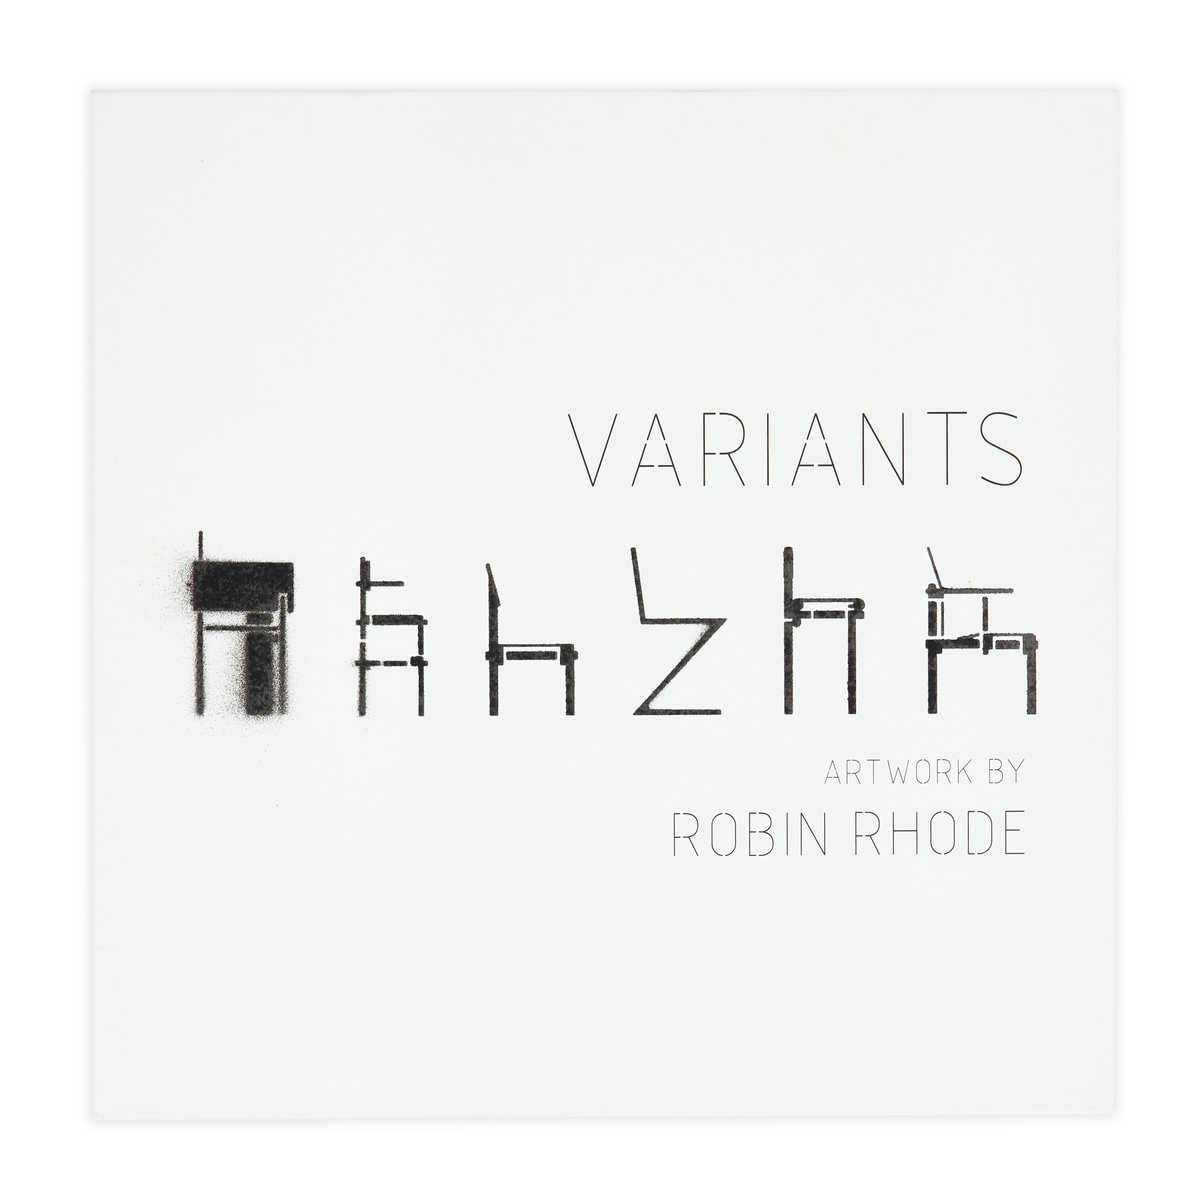 Photograph of the cover of Robin Rhode's 12" vinyl record 'Variants'.
